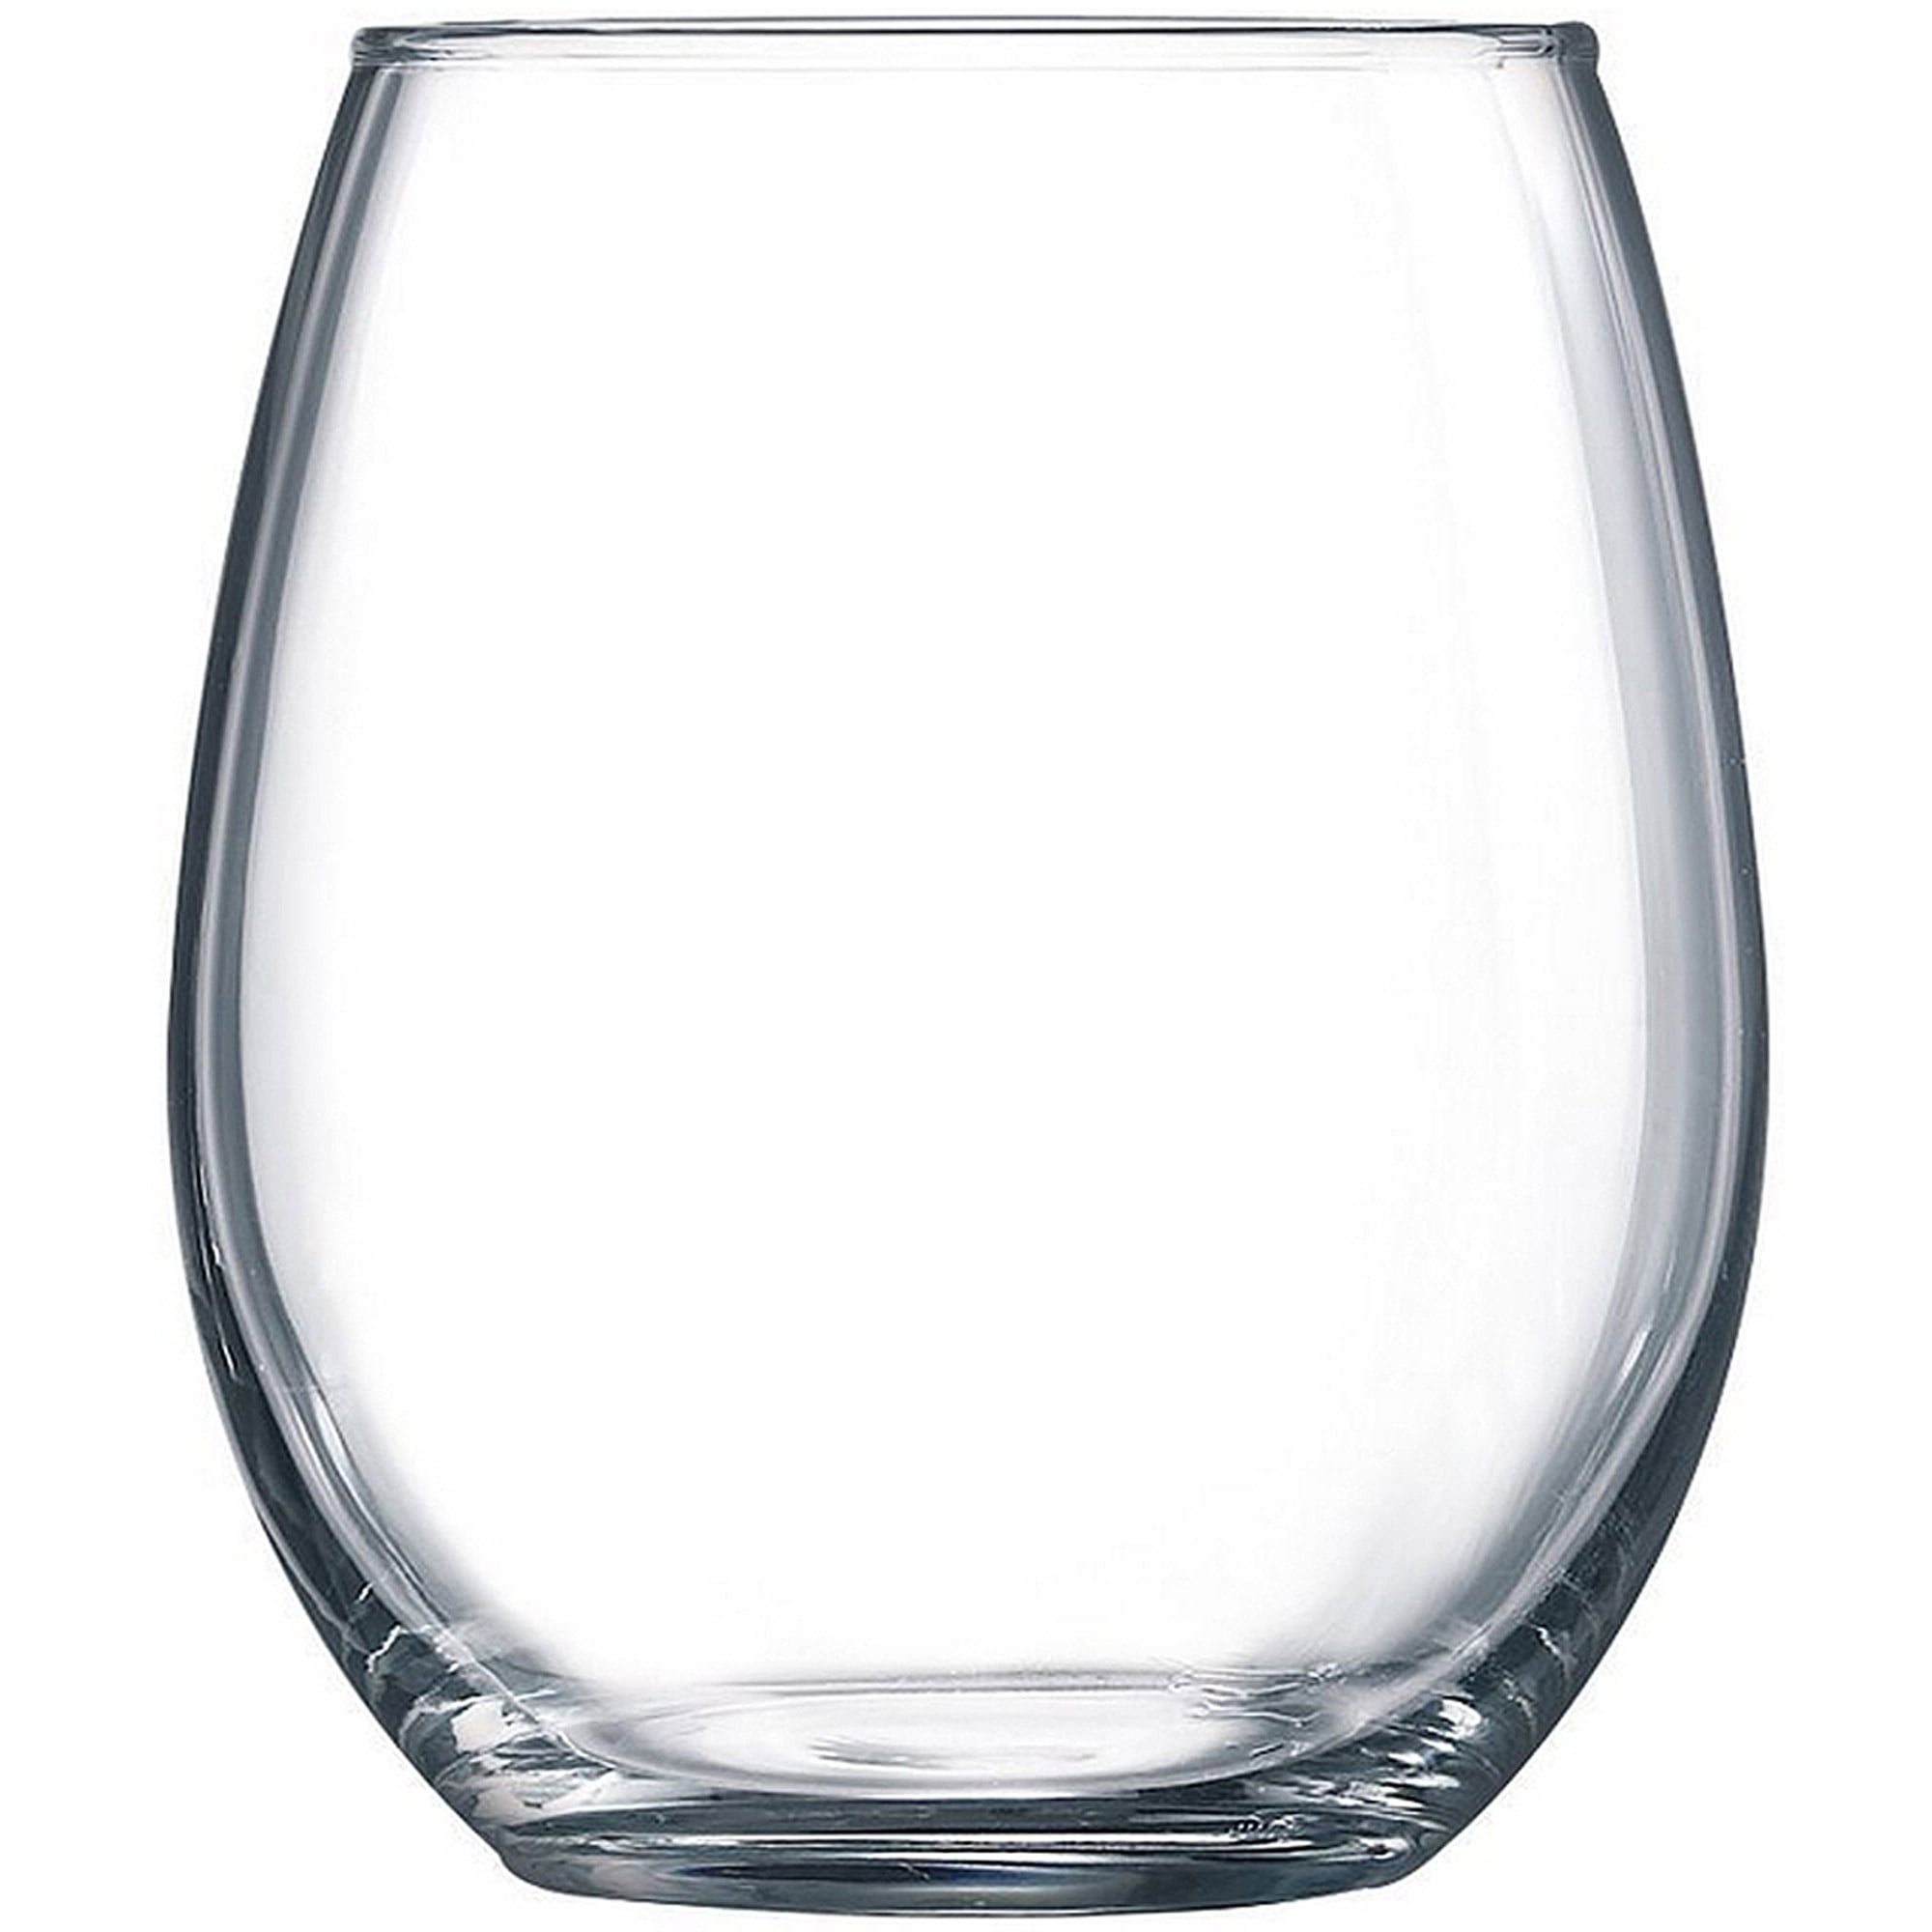 Chinet Crystal Stemless Wine Glass - 16ct/15oz